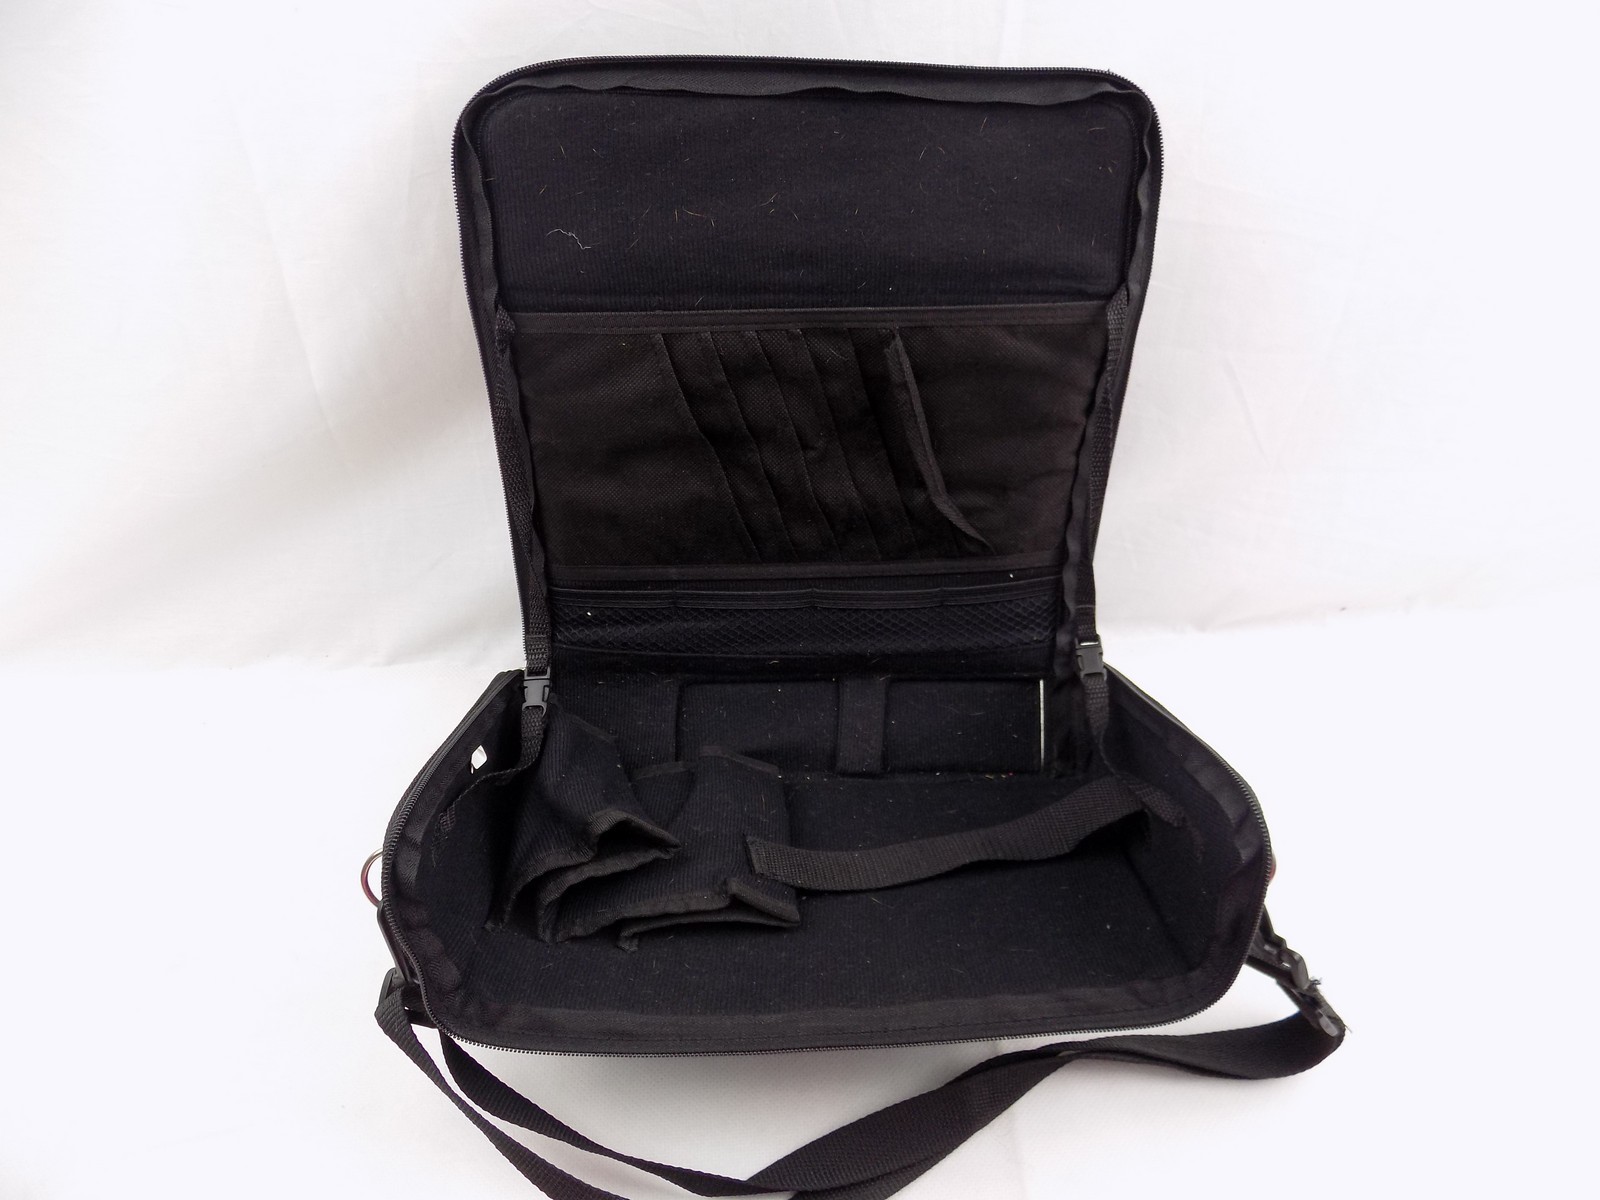 Pro Gamer Console Carry Bag - Starboard Games